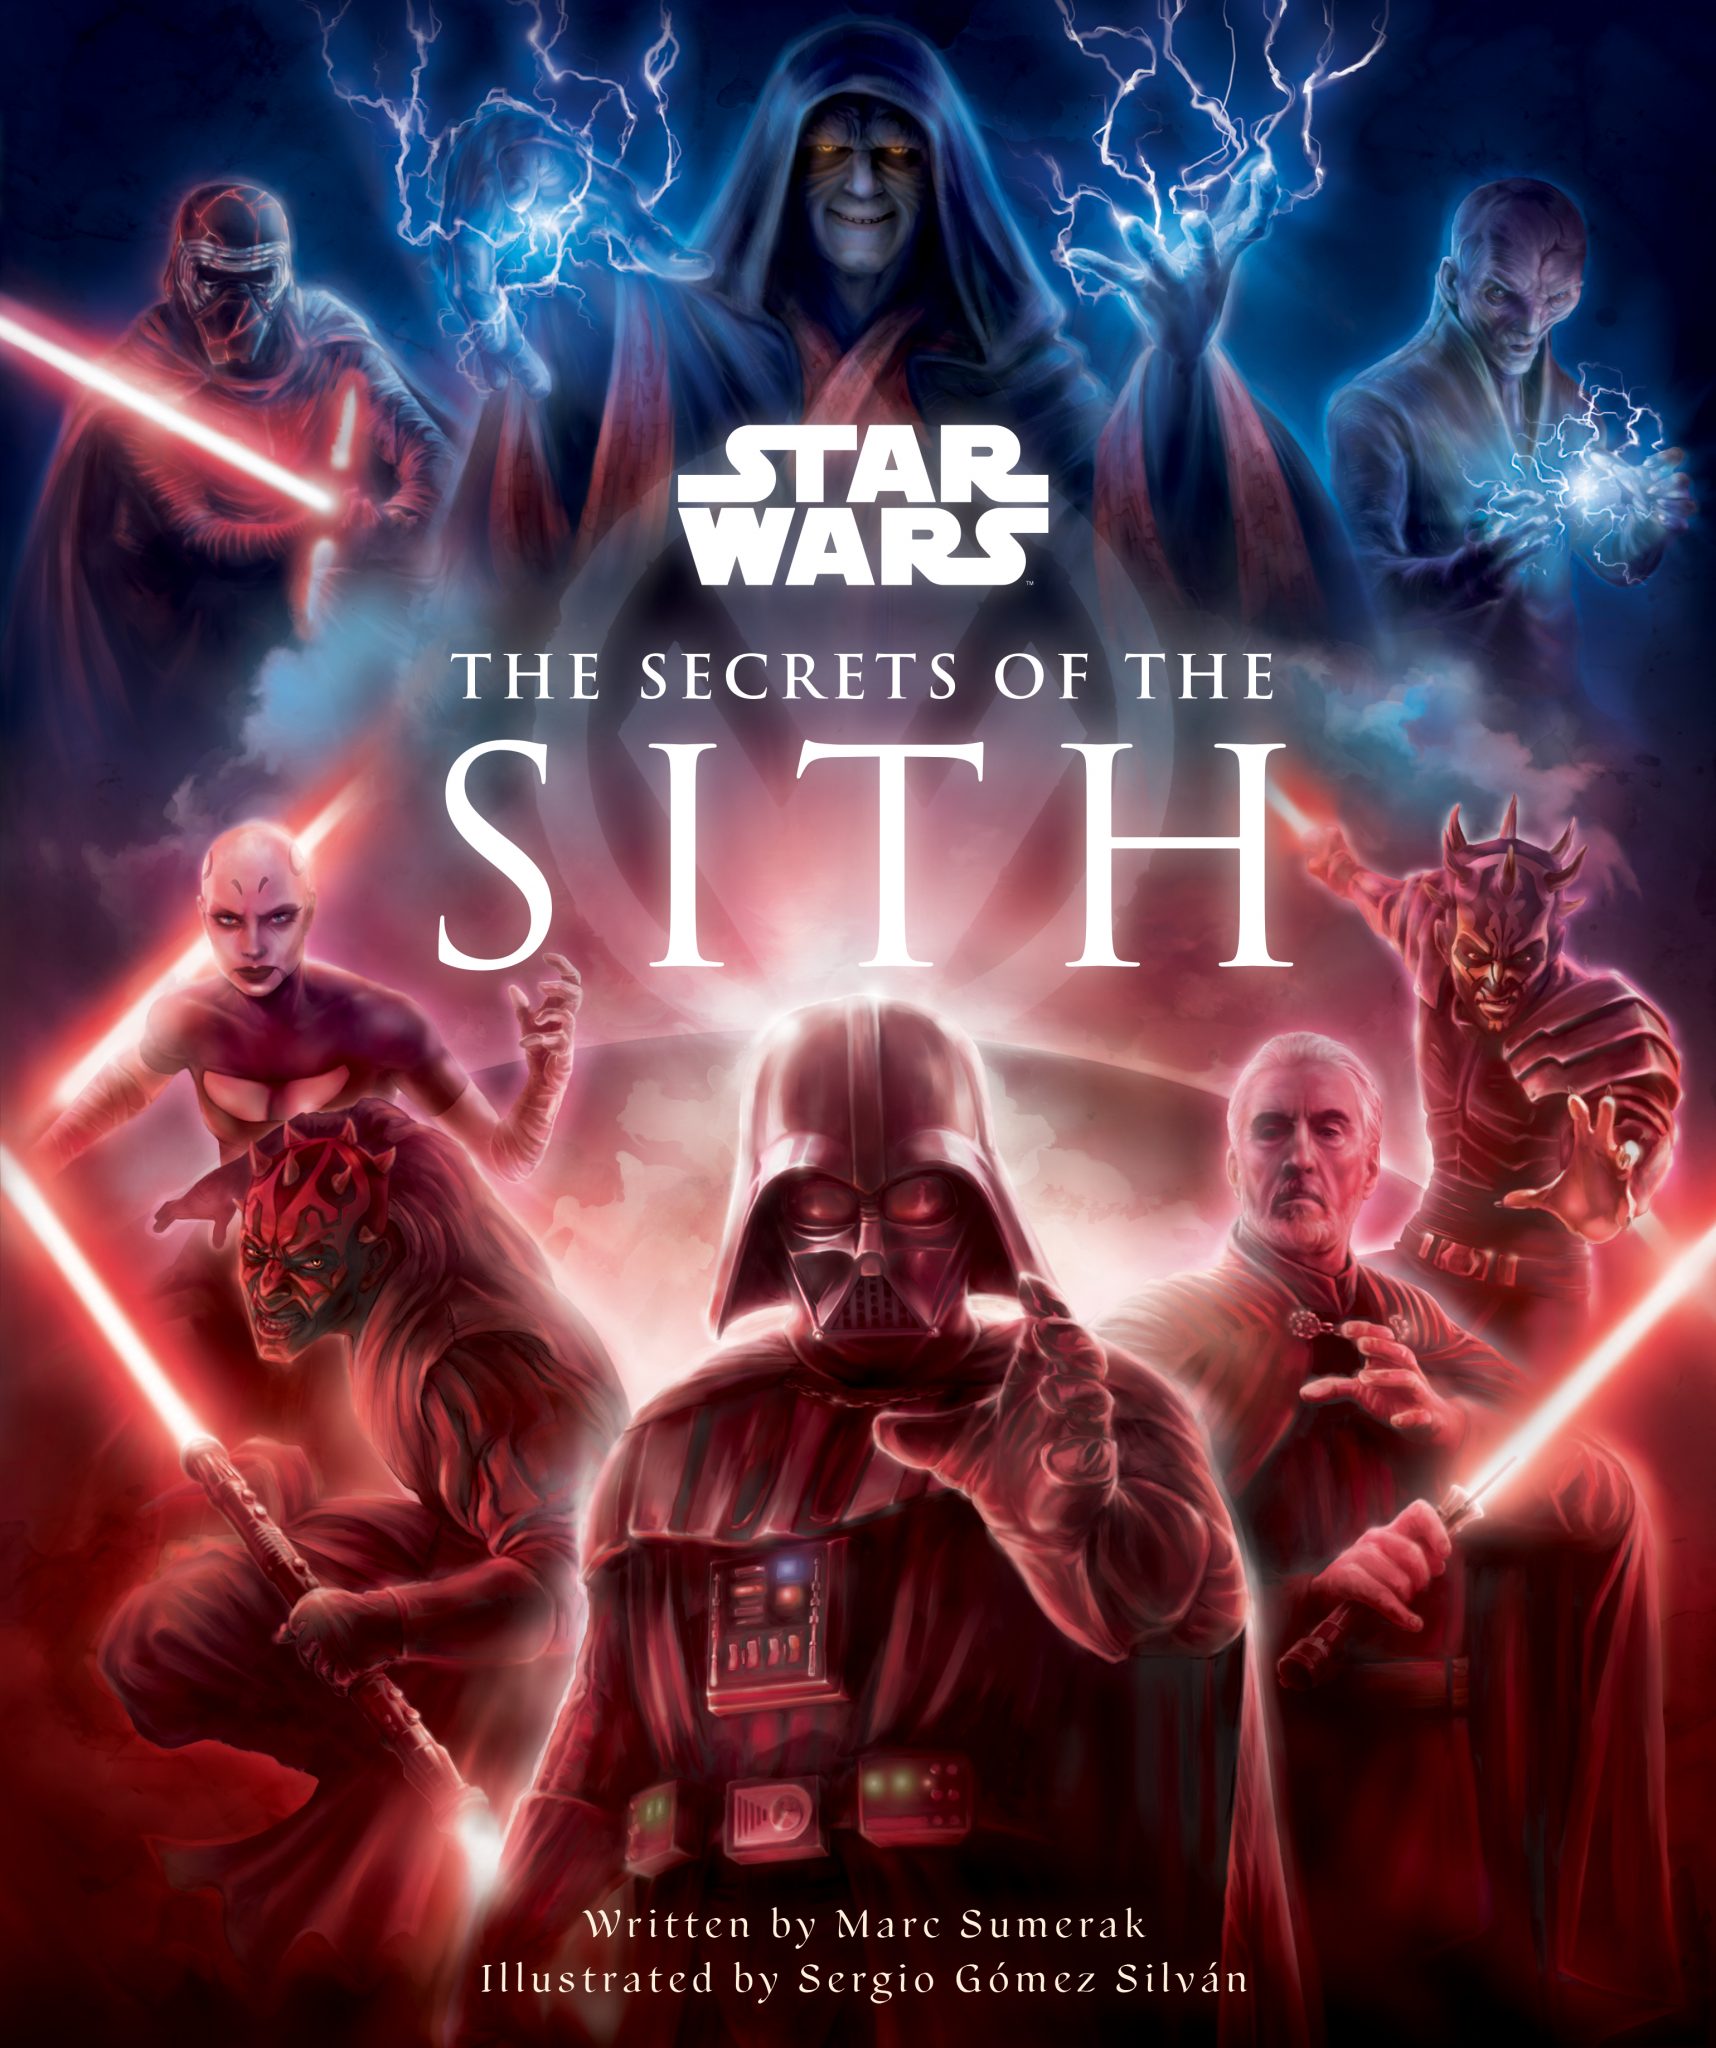 secrets-of-the-sith-from-insight-editions-announced-and-available-for